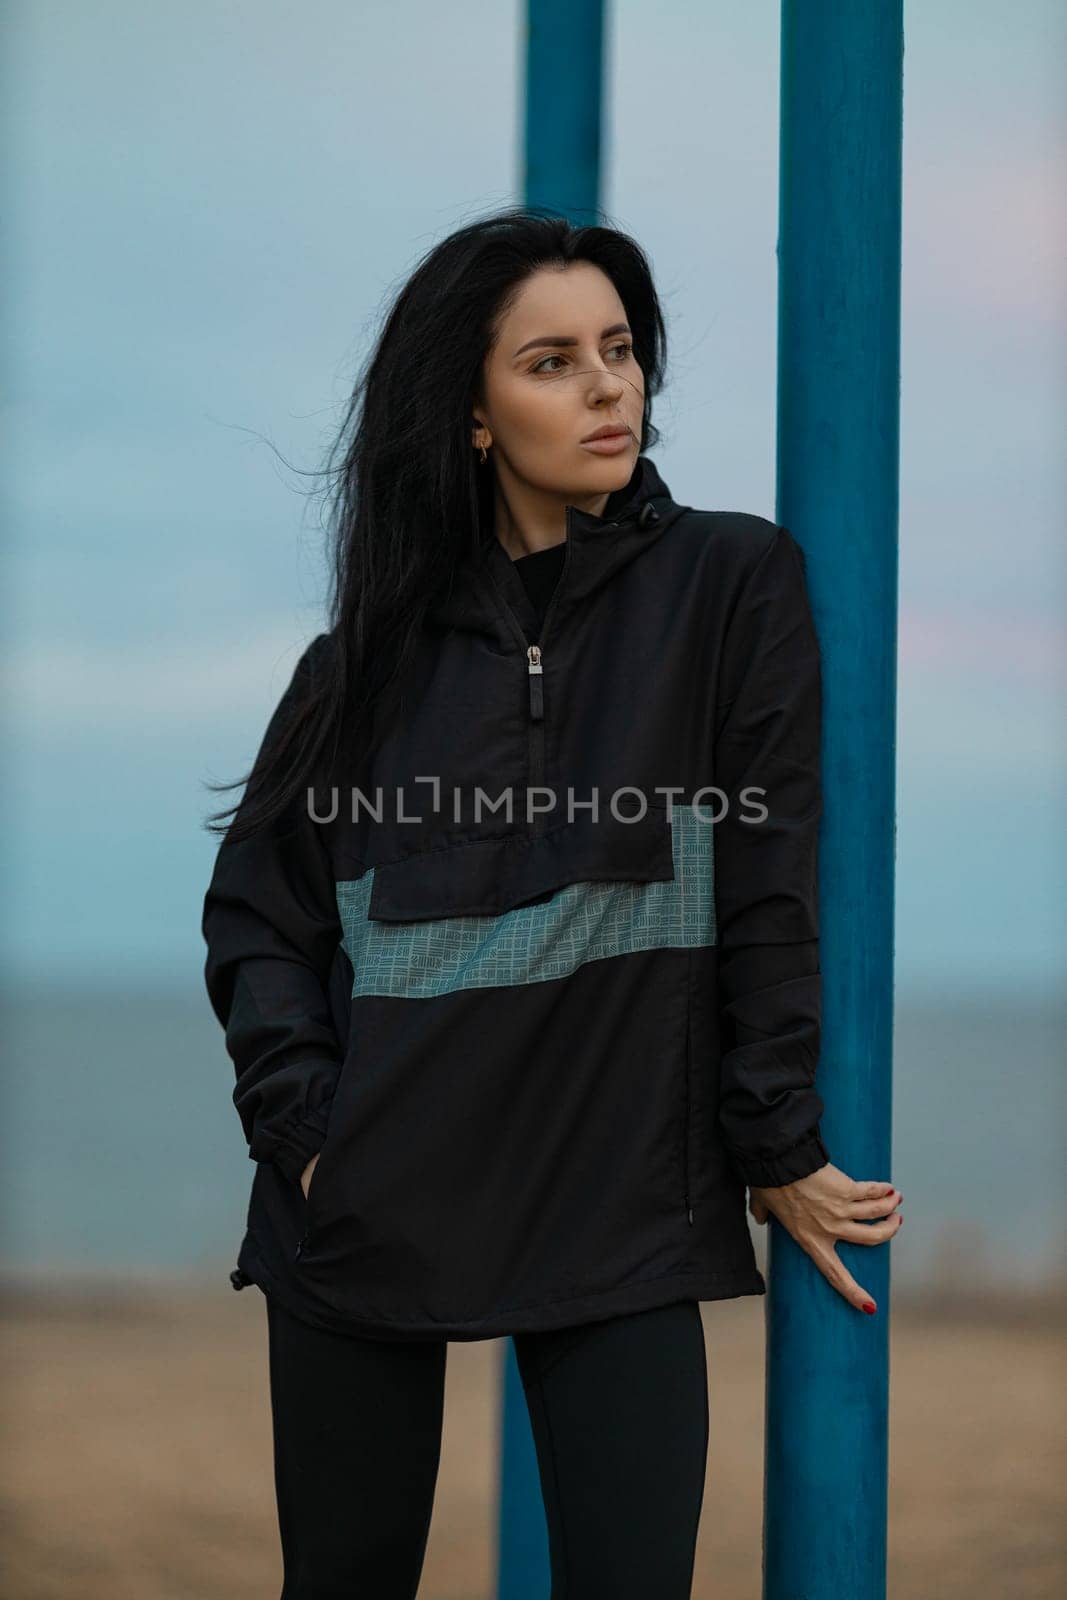 A beautiful brunette fitness model is working out on a sports ground by the sea. Young woman posing in an anorak and leggings outdoors. Fashionable sportswear for street training